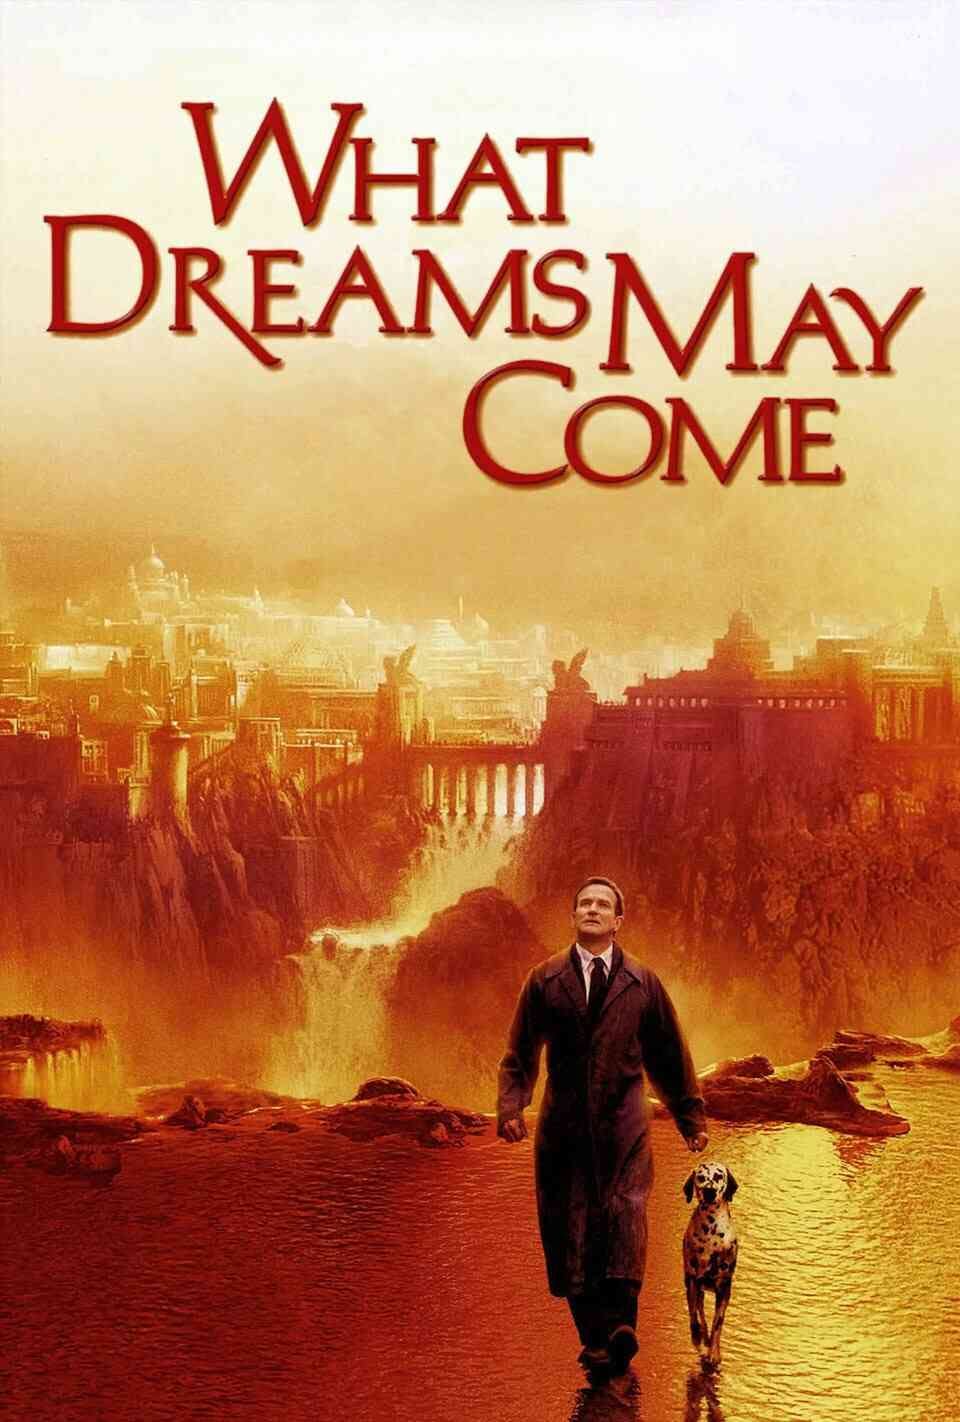 Read What Dreams May Come screenplay.